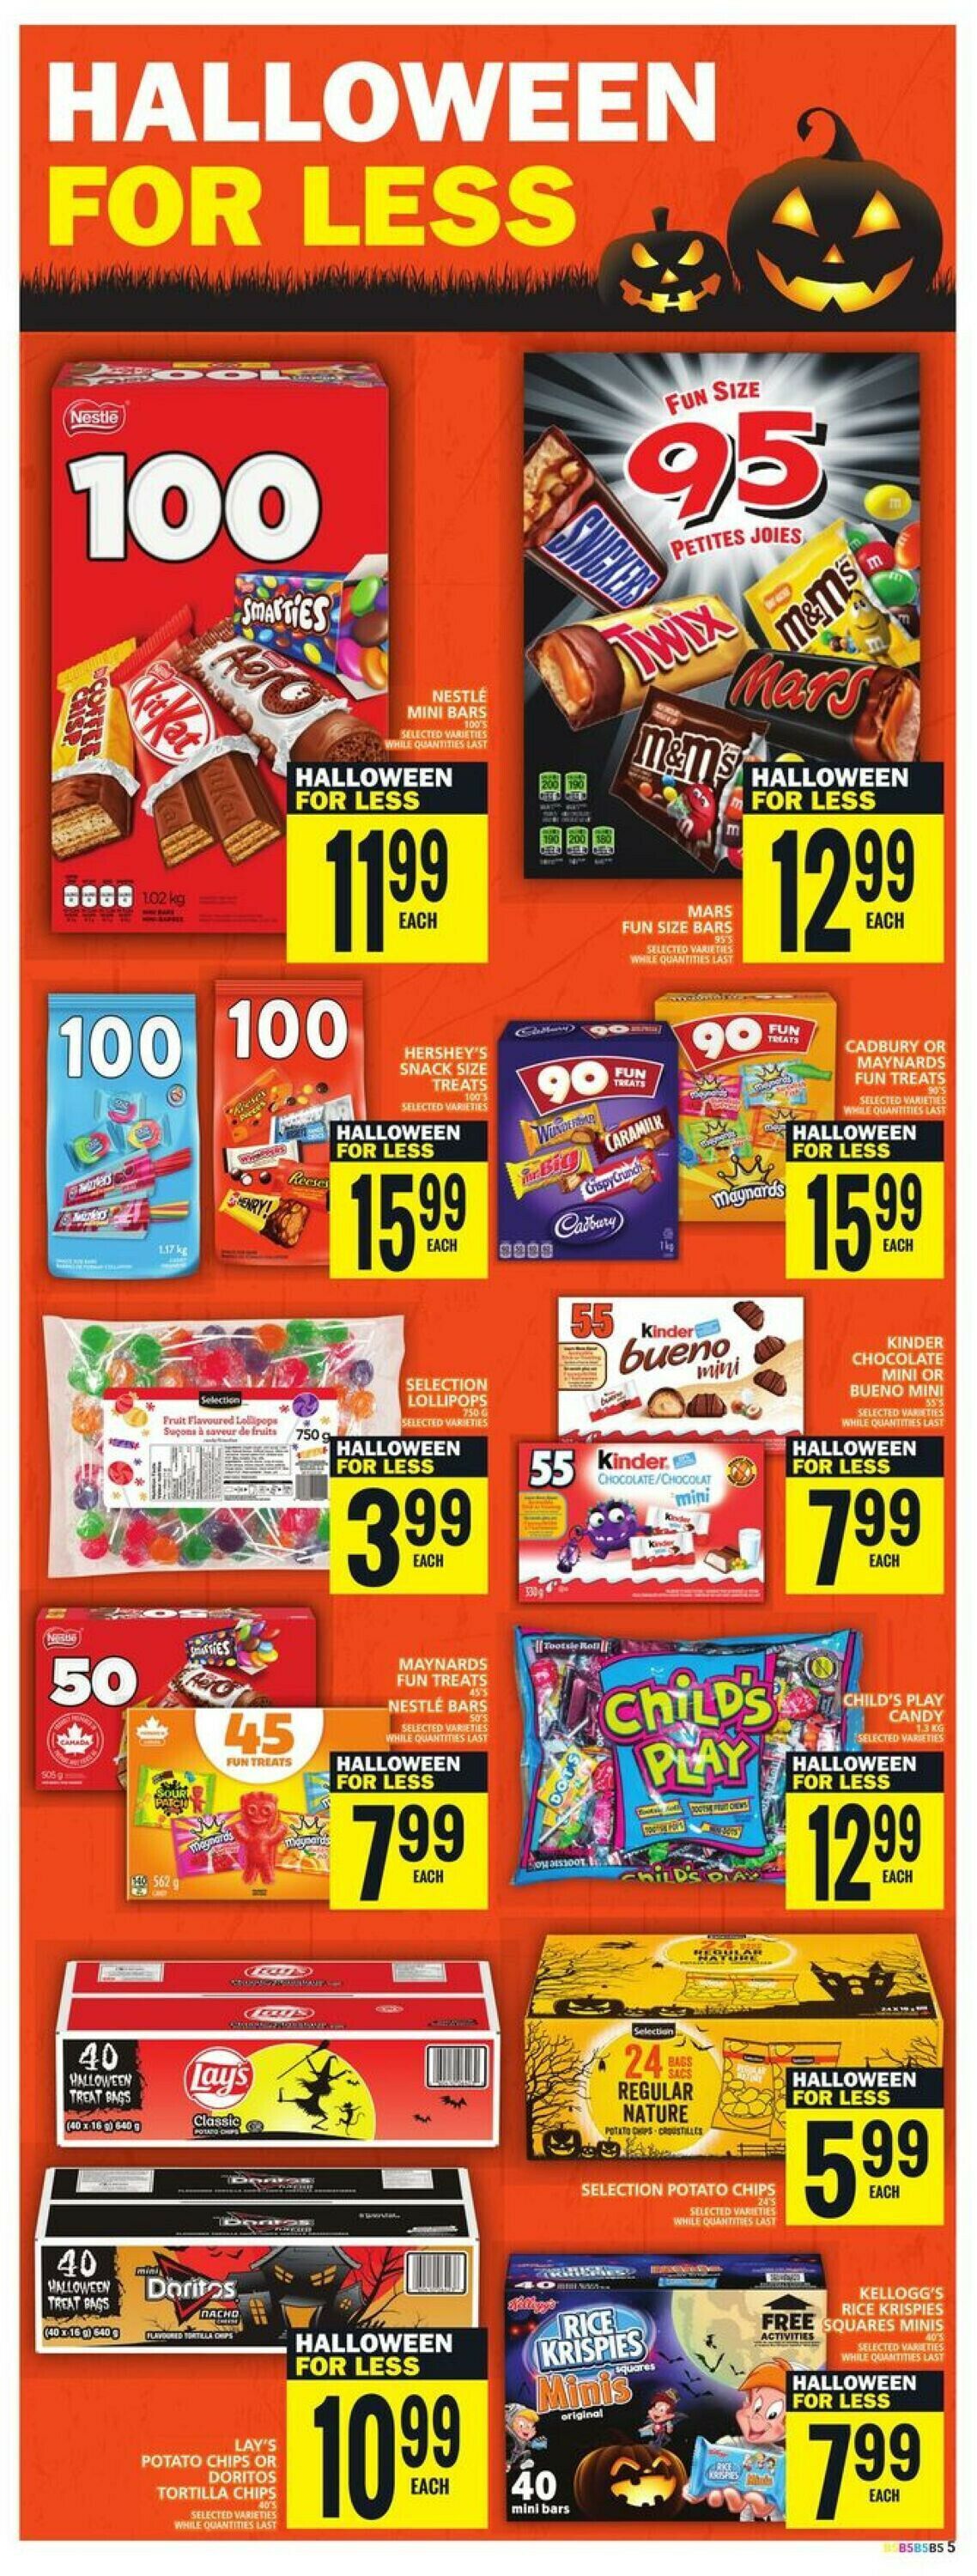 Food Basics Flyer from 10/19/2023